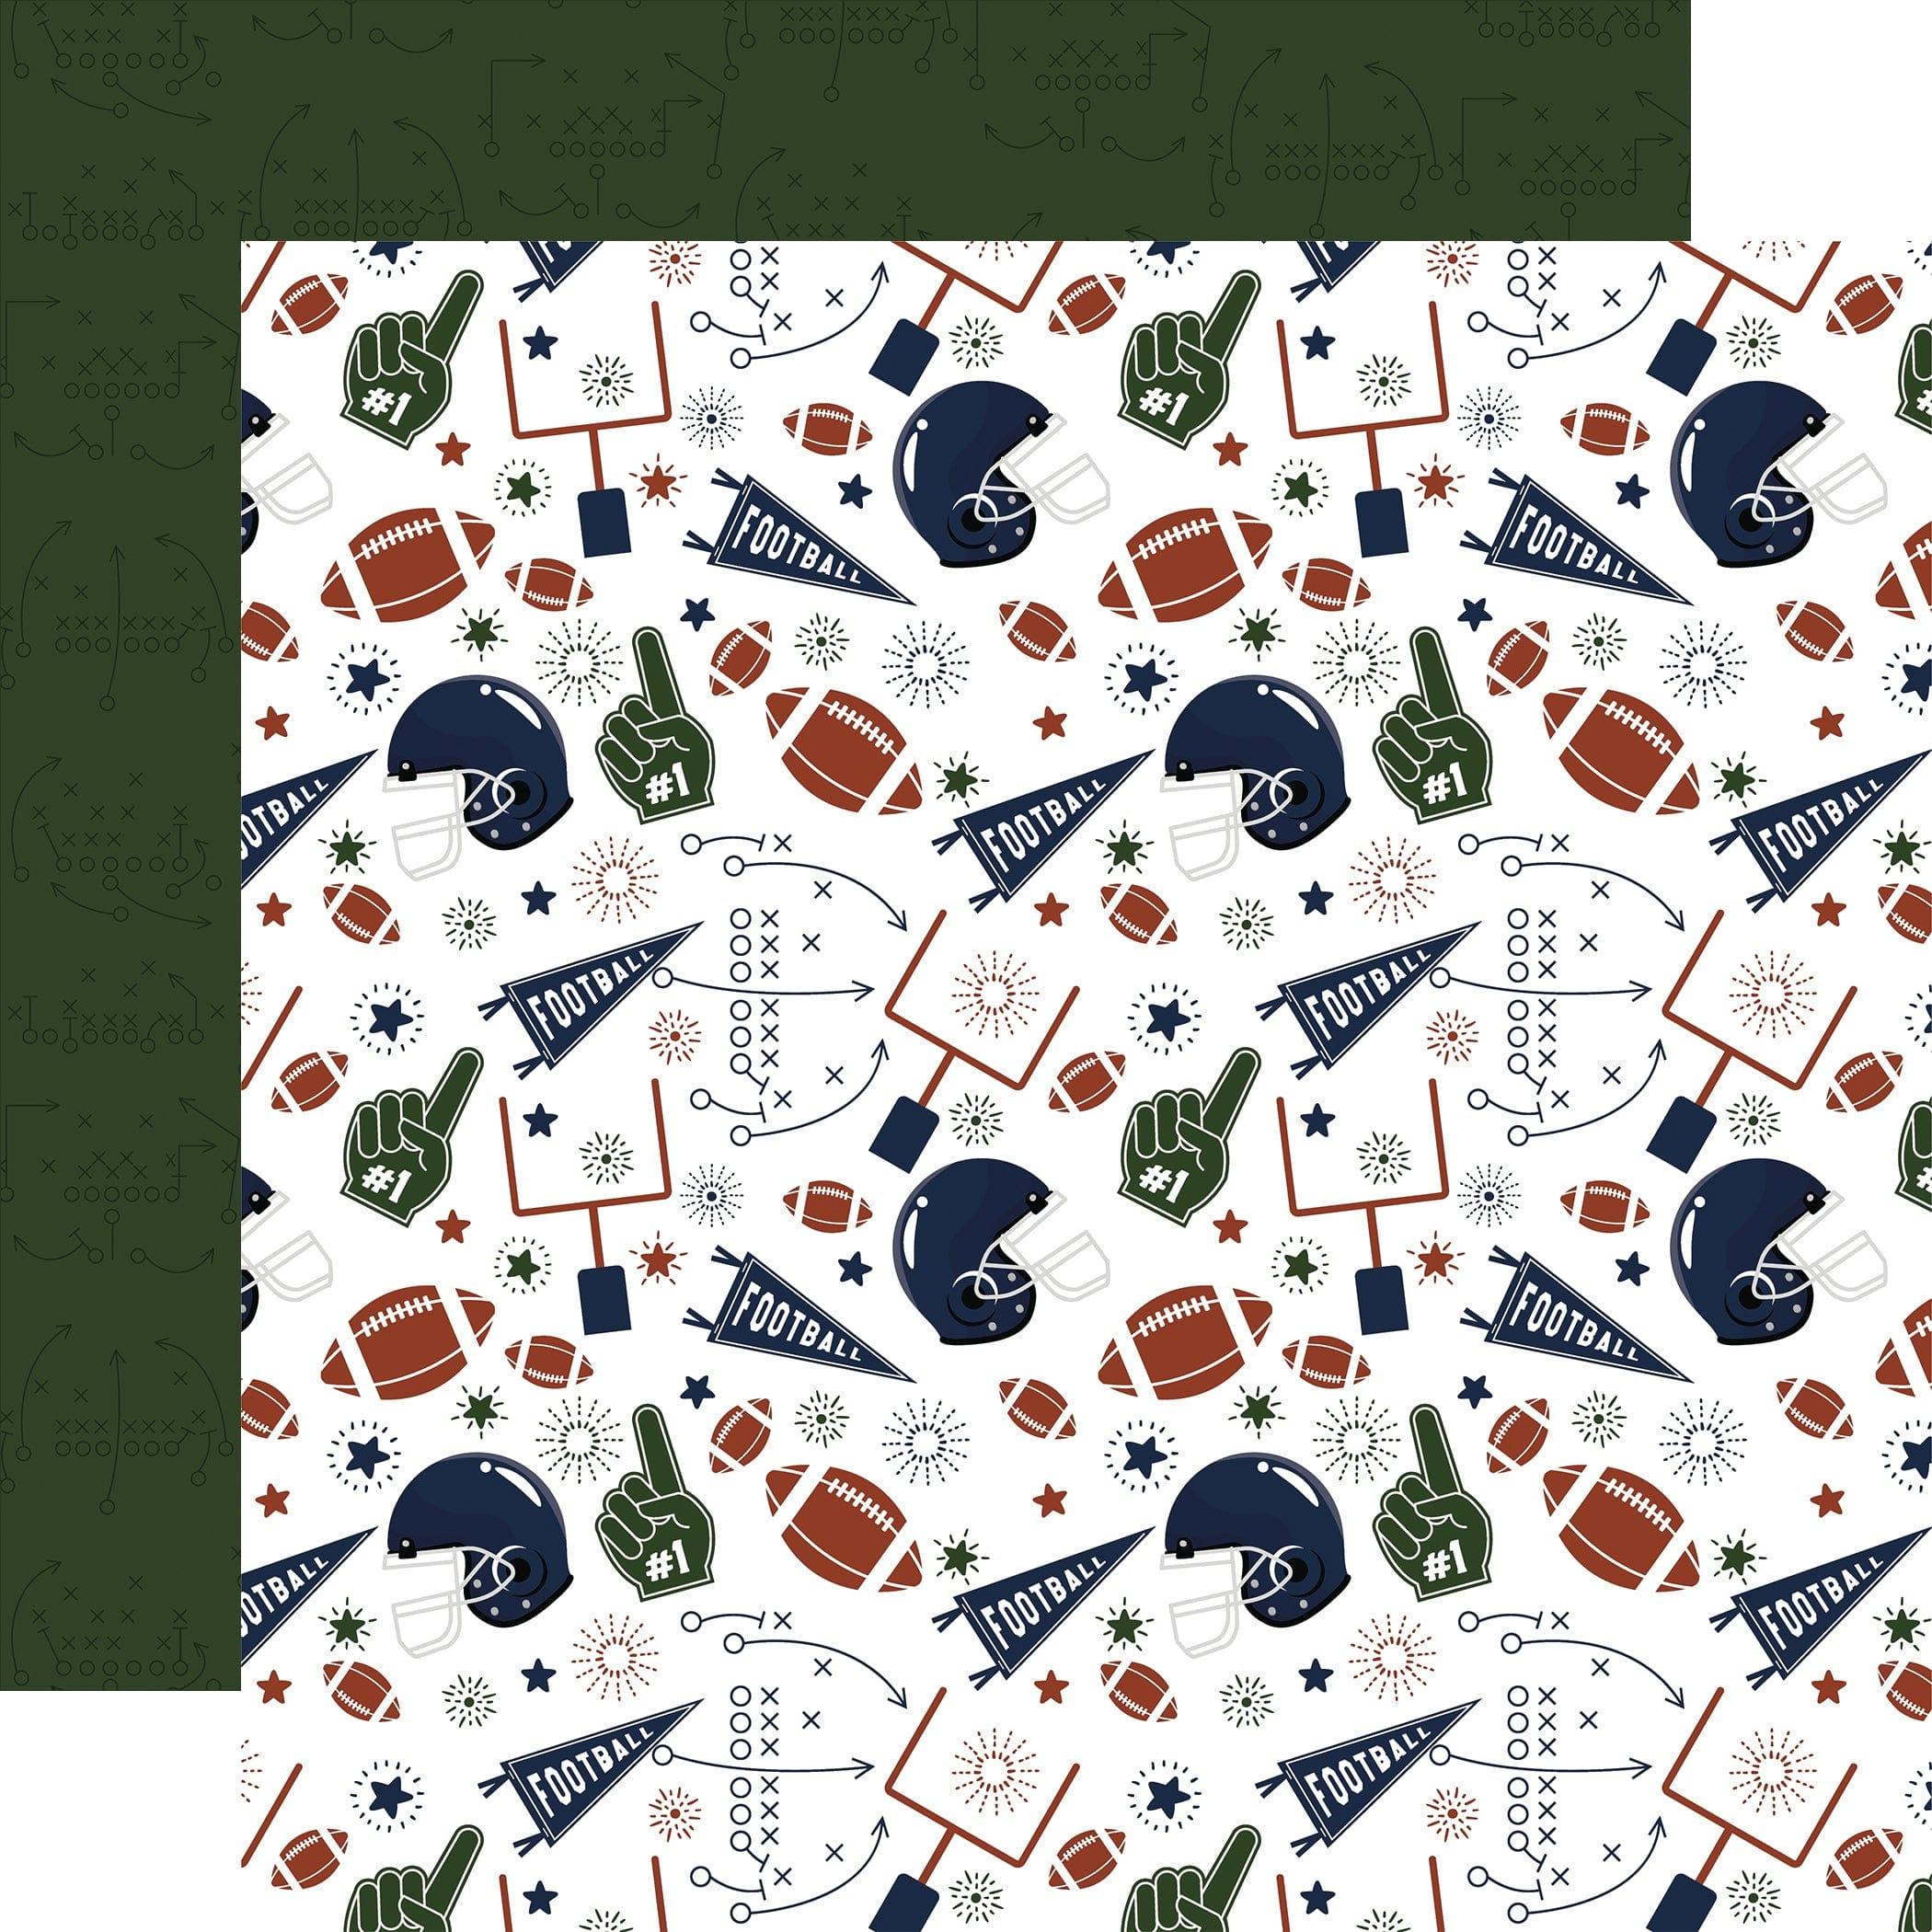 Football Collection Play Hard, Win Big 12 x 12 Double-Sided Scrapbook Paper by Echo Park Paper - Scrapbook Supply Companies